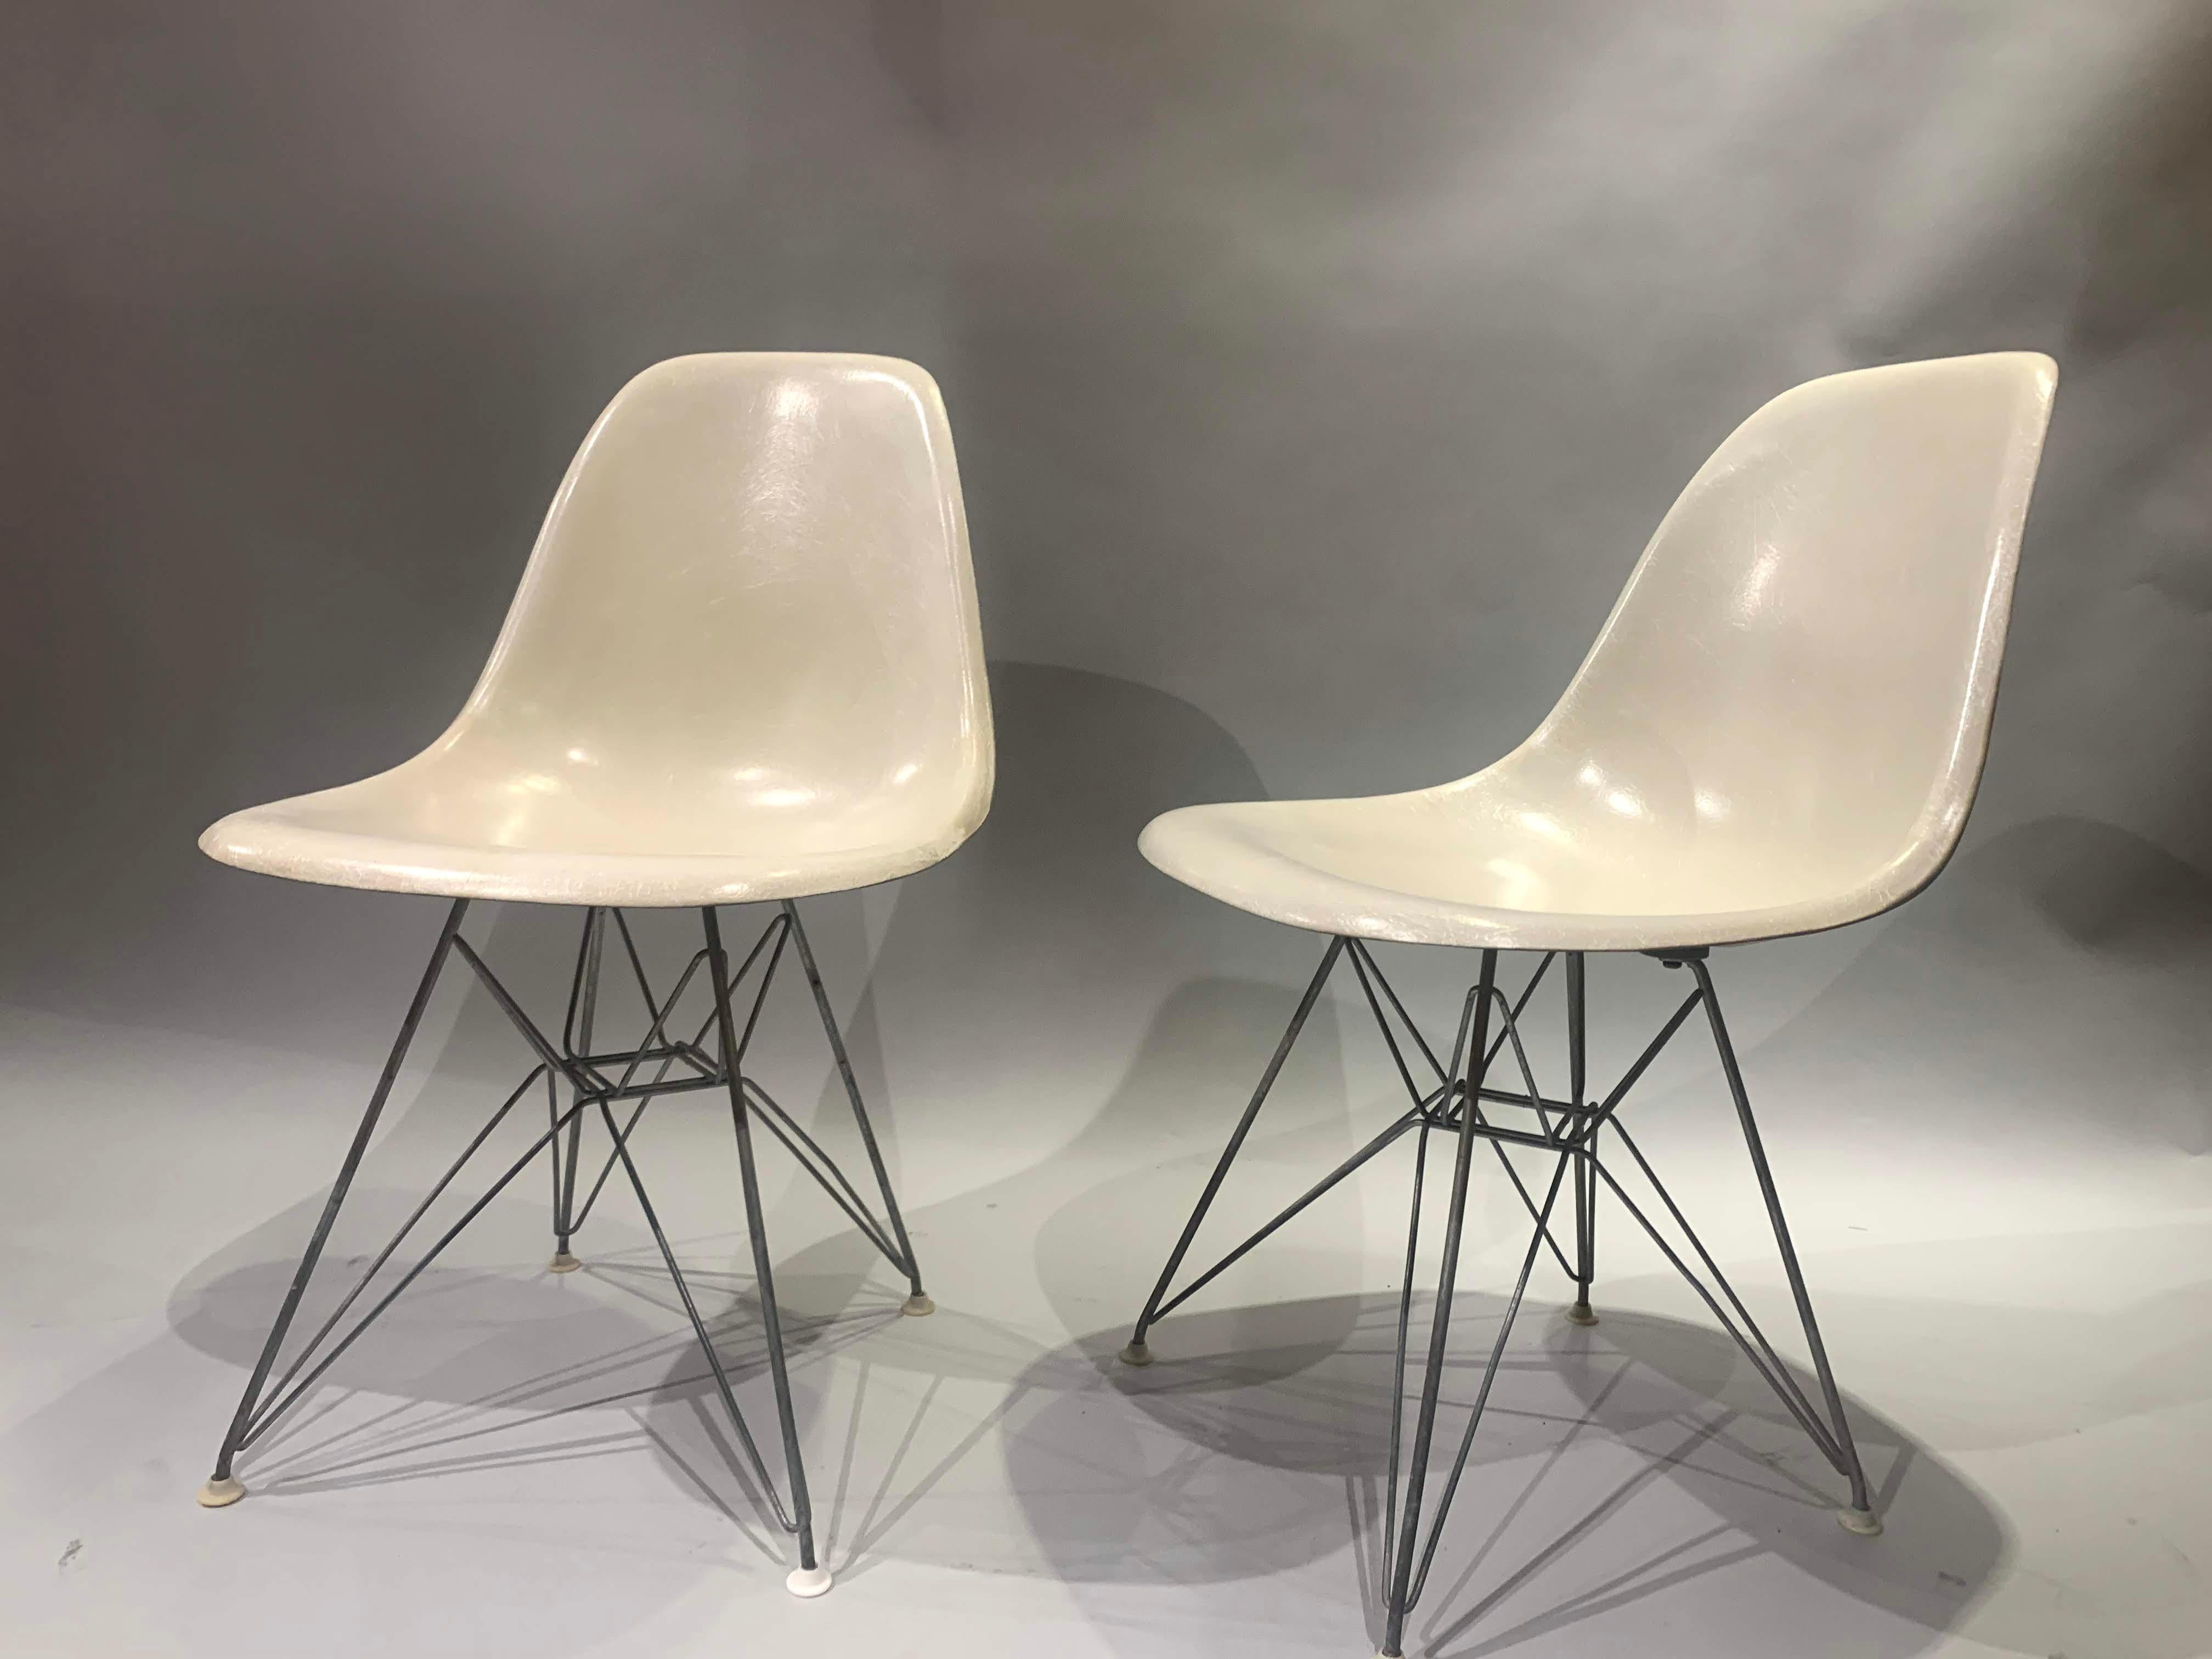 A fine pair of midcentury Charles and Ray Eames designed fiberglass side shell chairs for Herman Miller, with ebonized Eiffel Tower form wire bases in fine overall condition, with minimal imperfections and light expected wear. Dimensions: Each